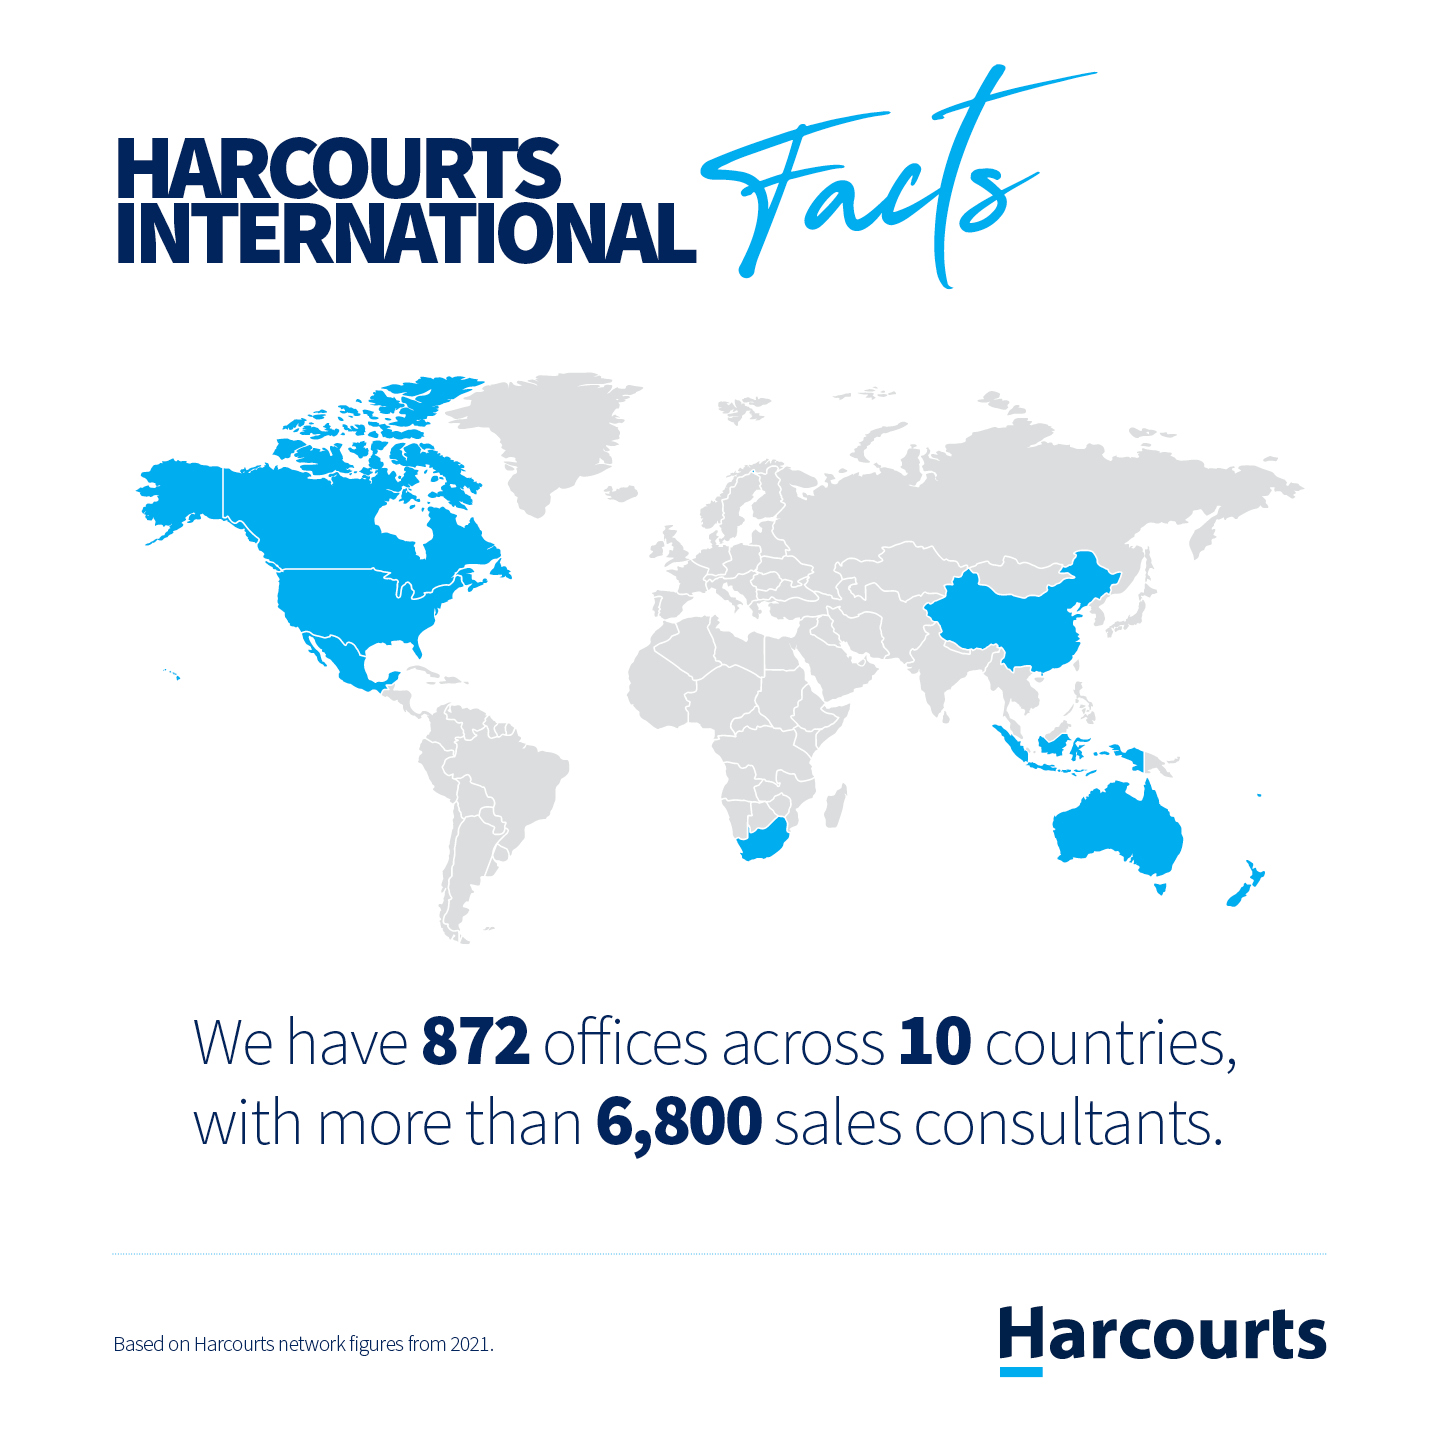 Fact: We have 872 offices across 10 countries, with more than 6,800 sales consultants.